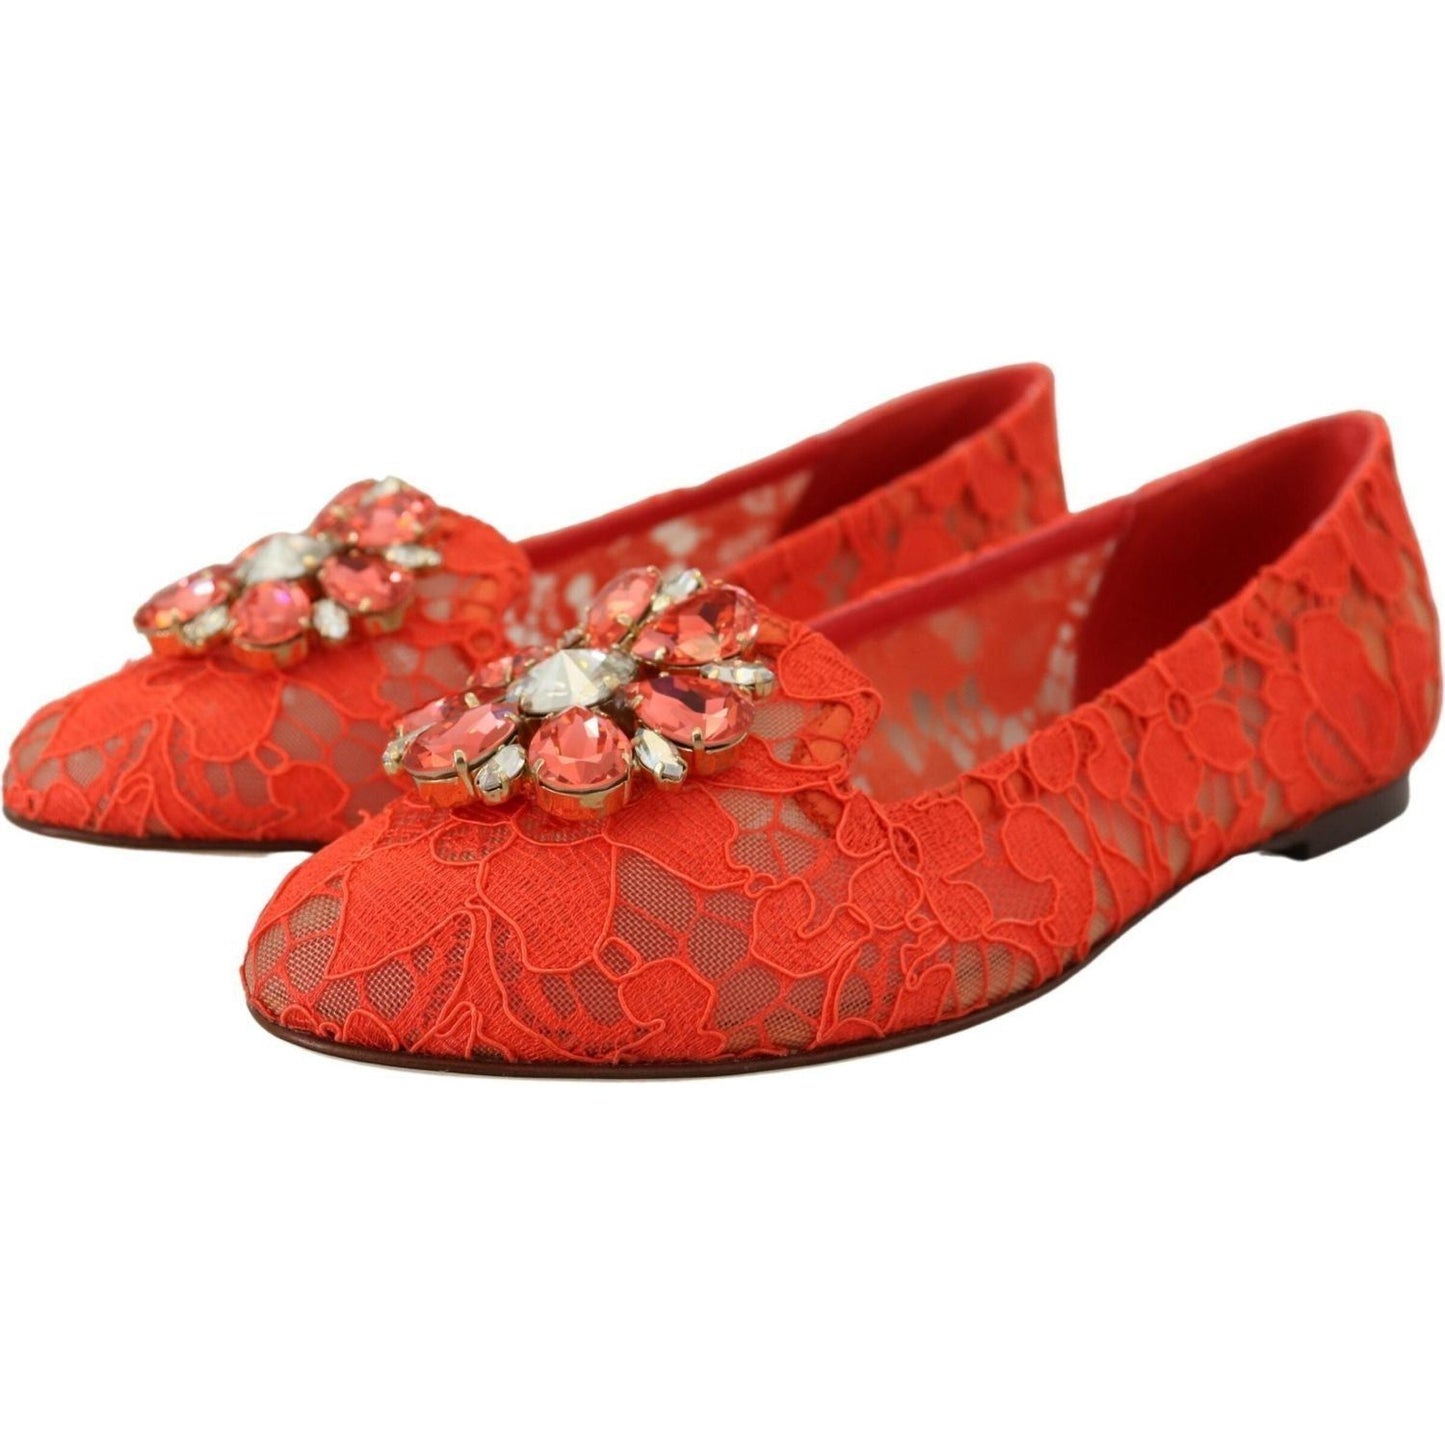 Dolce & Gabbana Elegant Lace Vally Flats in Coral Red red-taormina-lace-crystals-ballet-flats-shoes IMG_4966-scaled-0e77f54e-45f.jpg